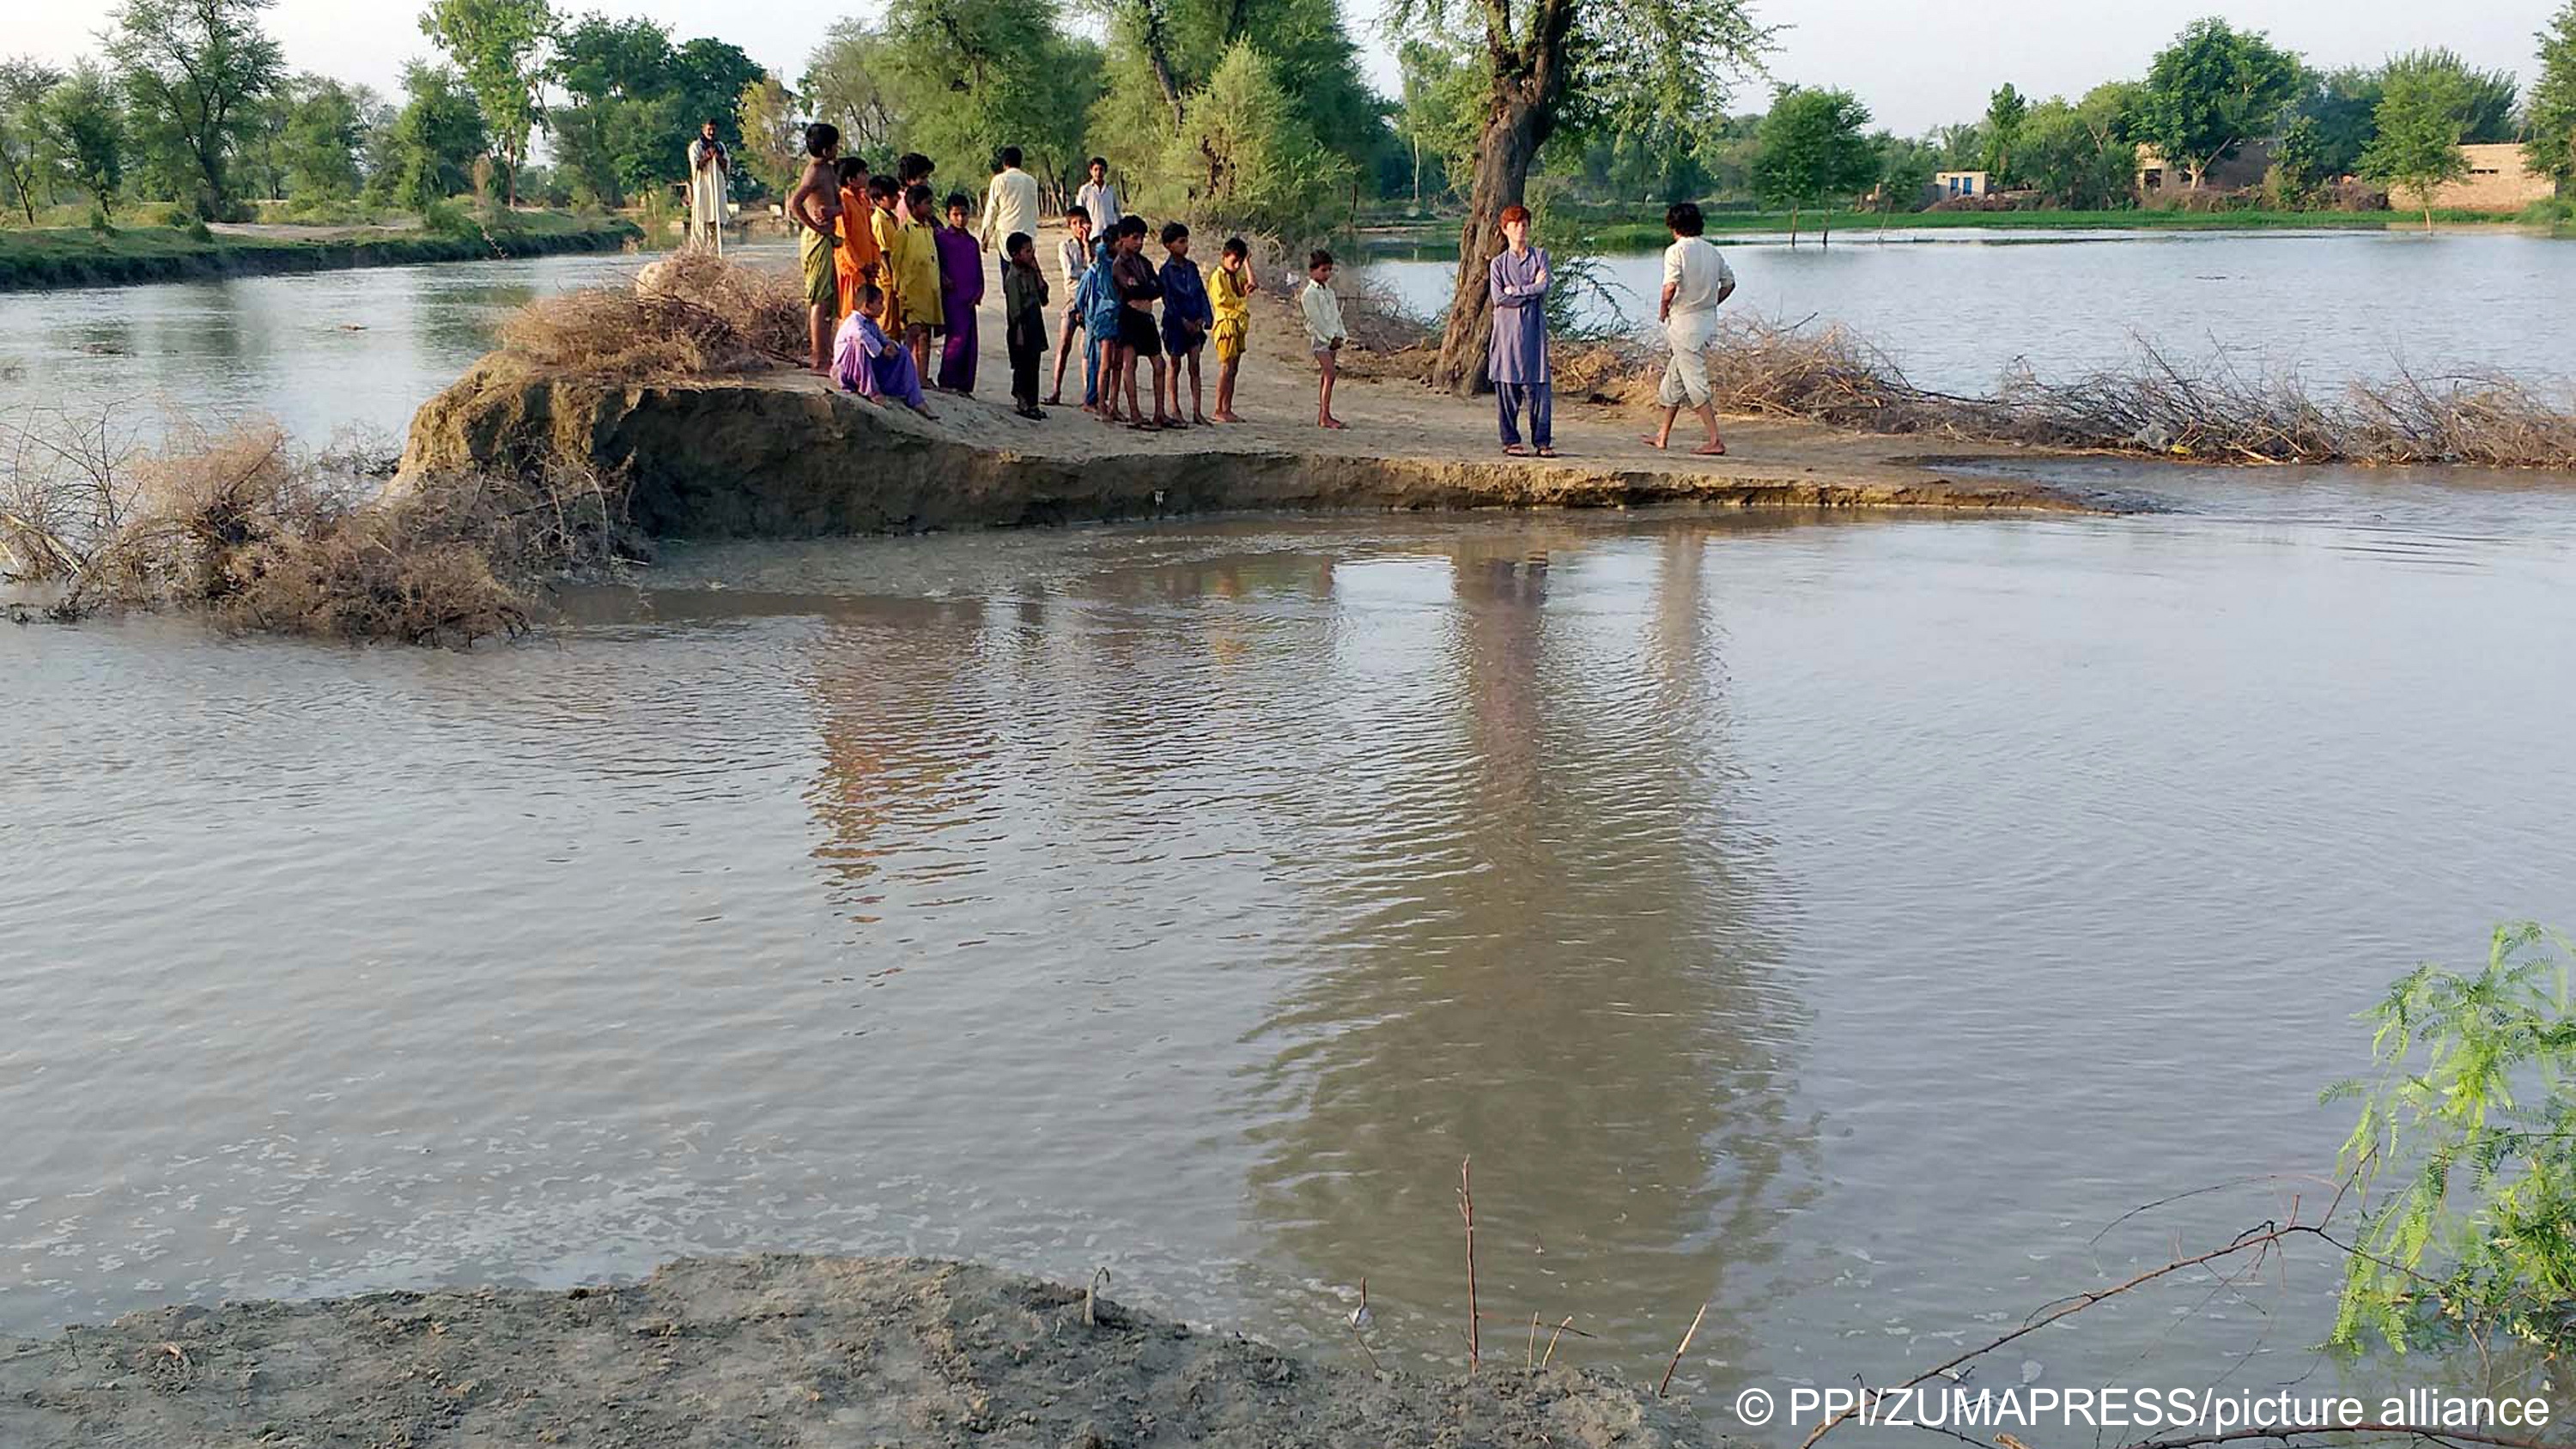 Cotton crops were flooded.near Ubauro, Pakistan, when the Indus river burst its banks in June 2020 (photo: picture-alliance)